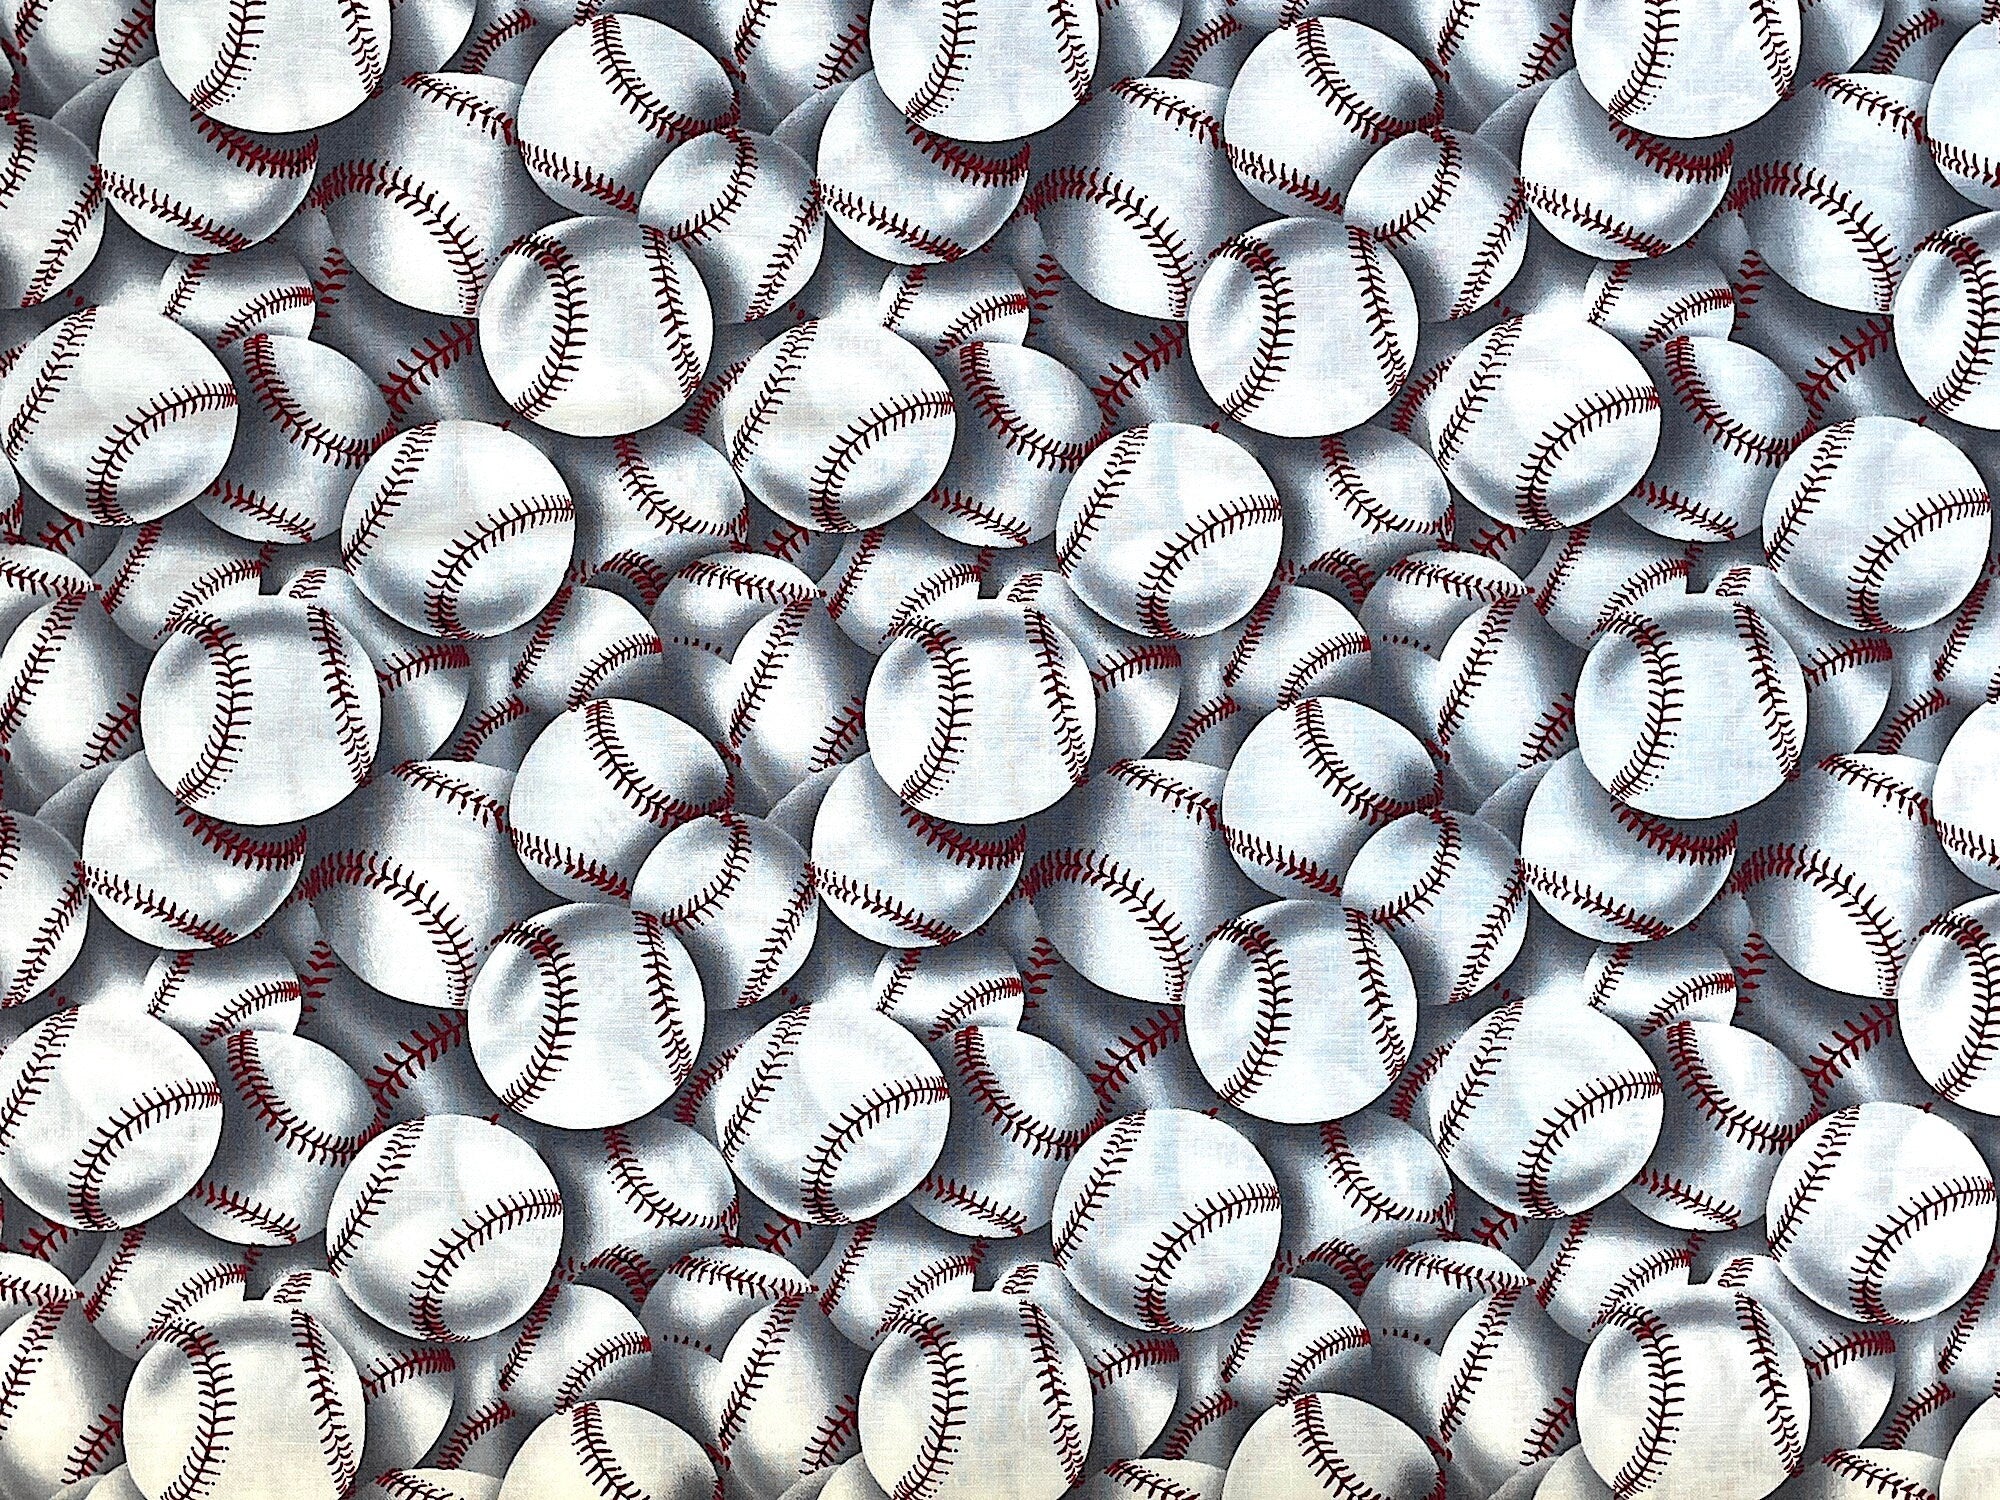 This cotton fabric is covered with baseballs. The colors in this fabric are white, grey and red.